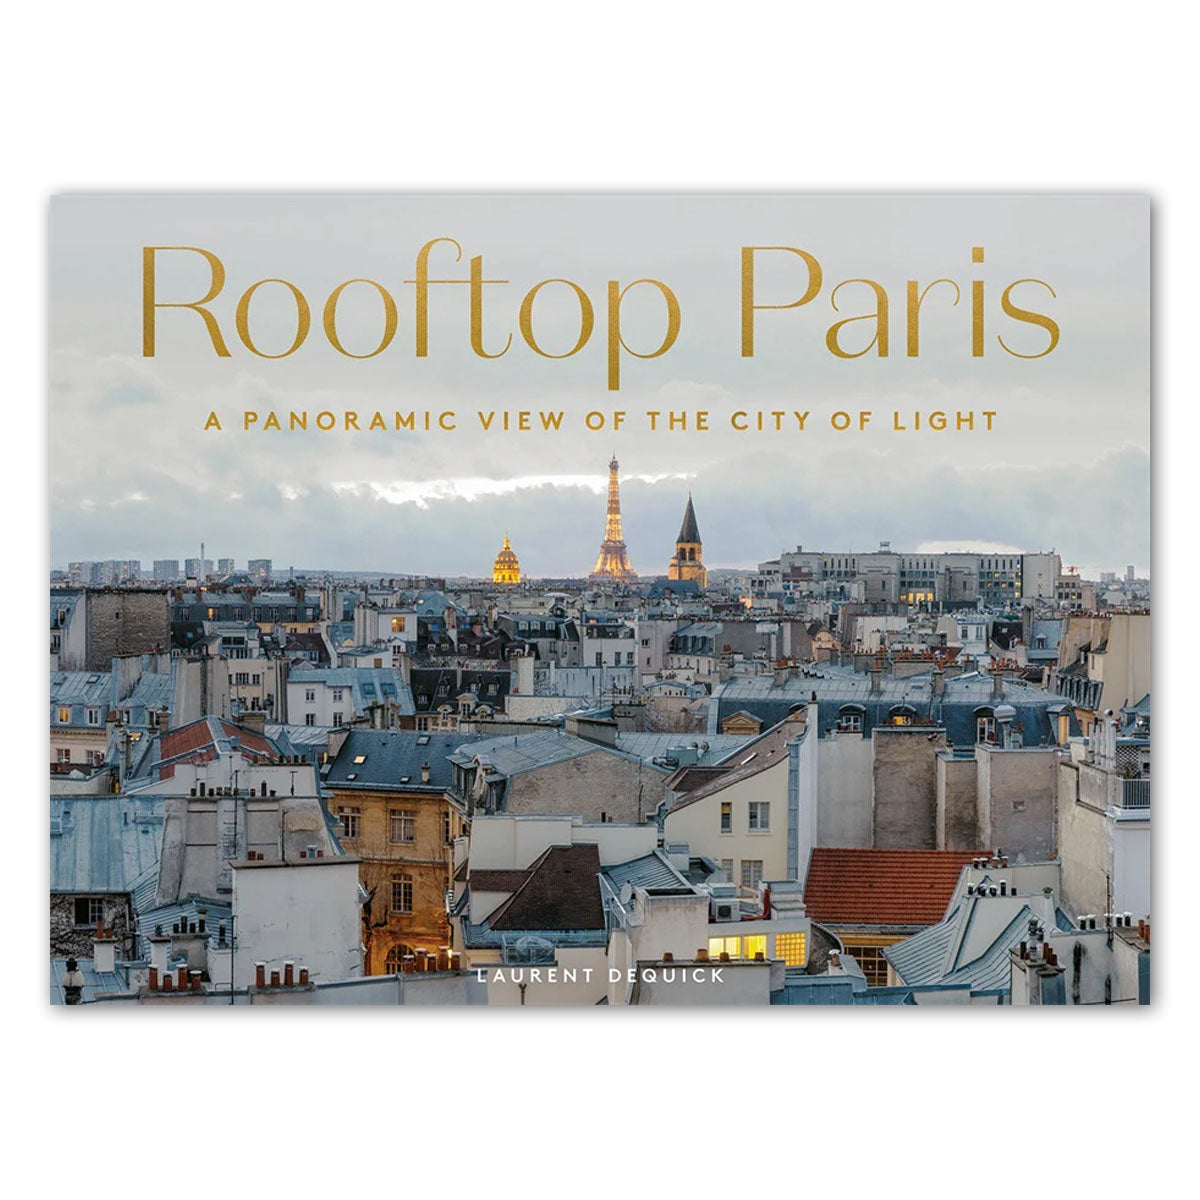 Rooftop Paris - A Panoramic View of the City of Light